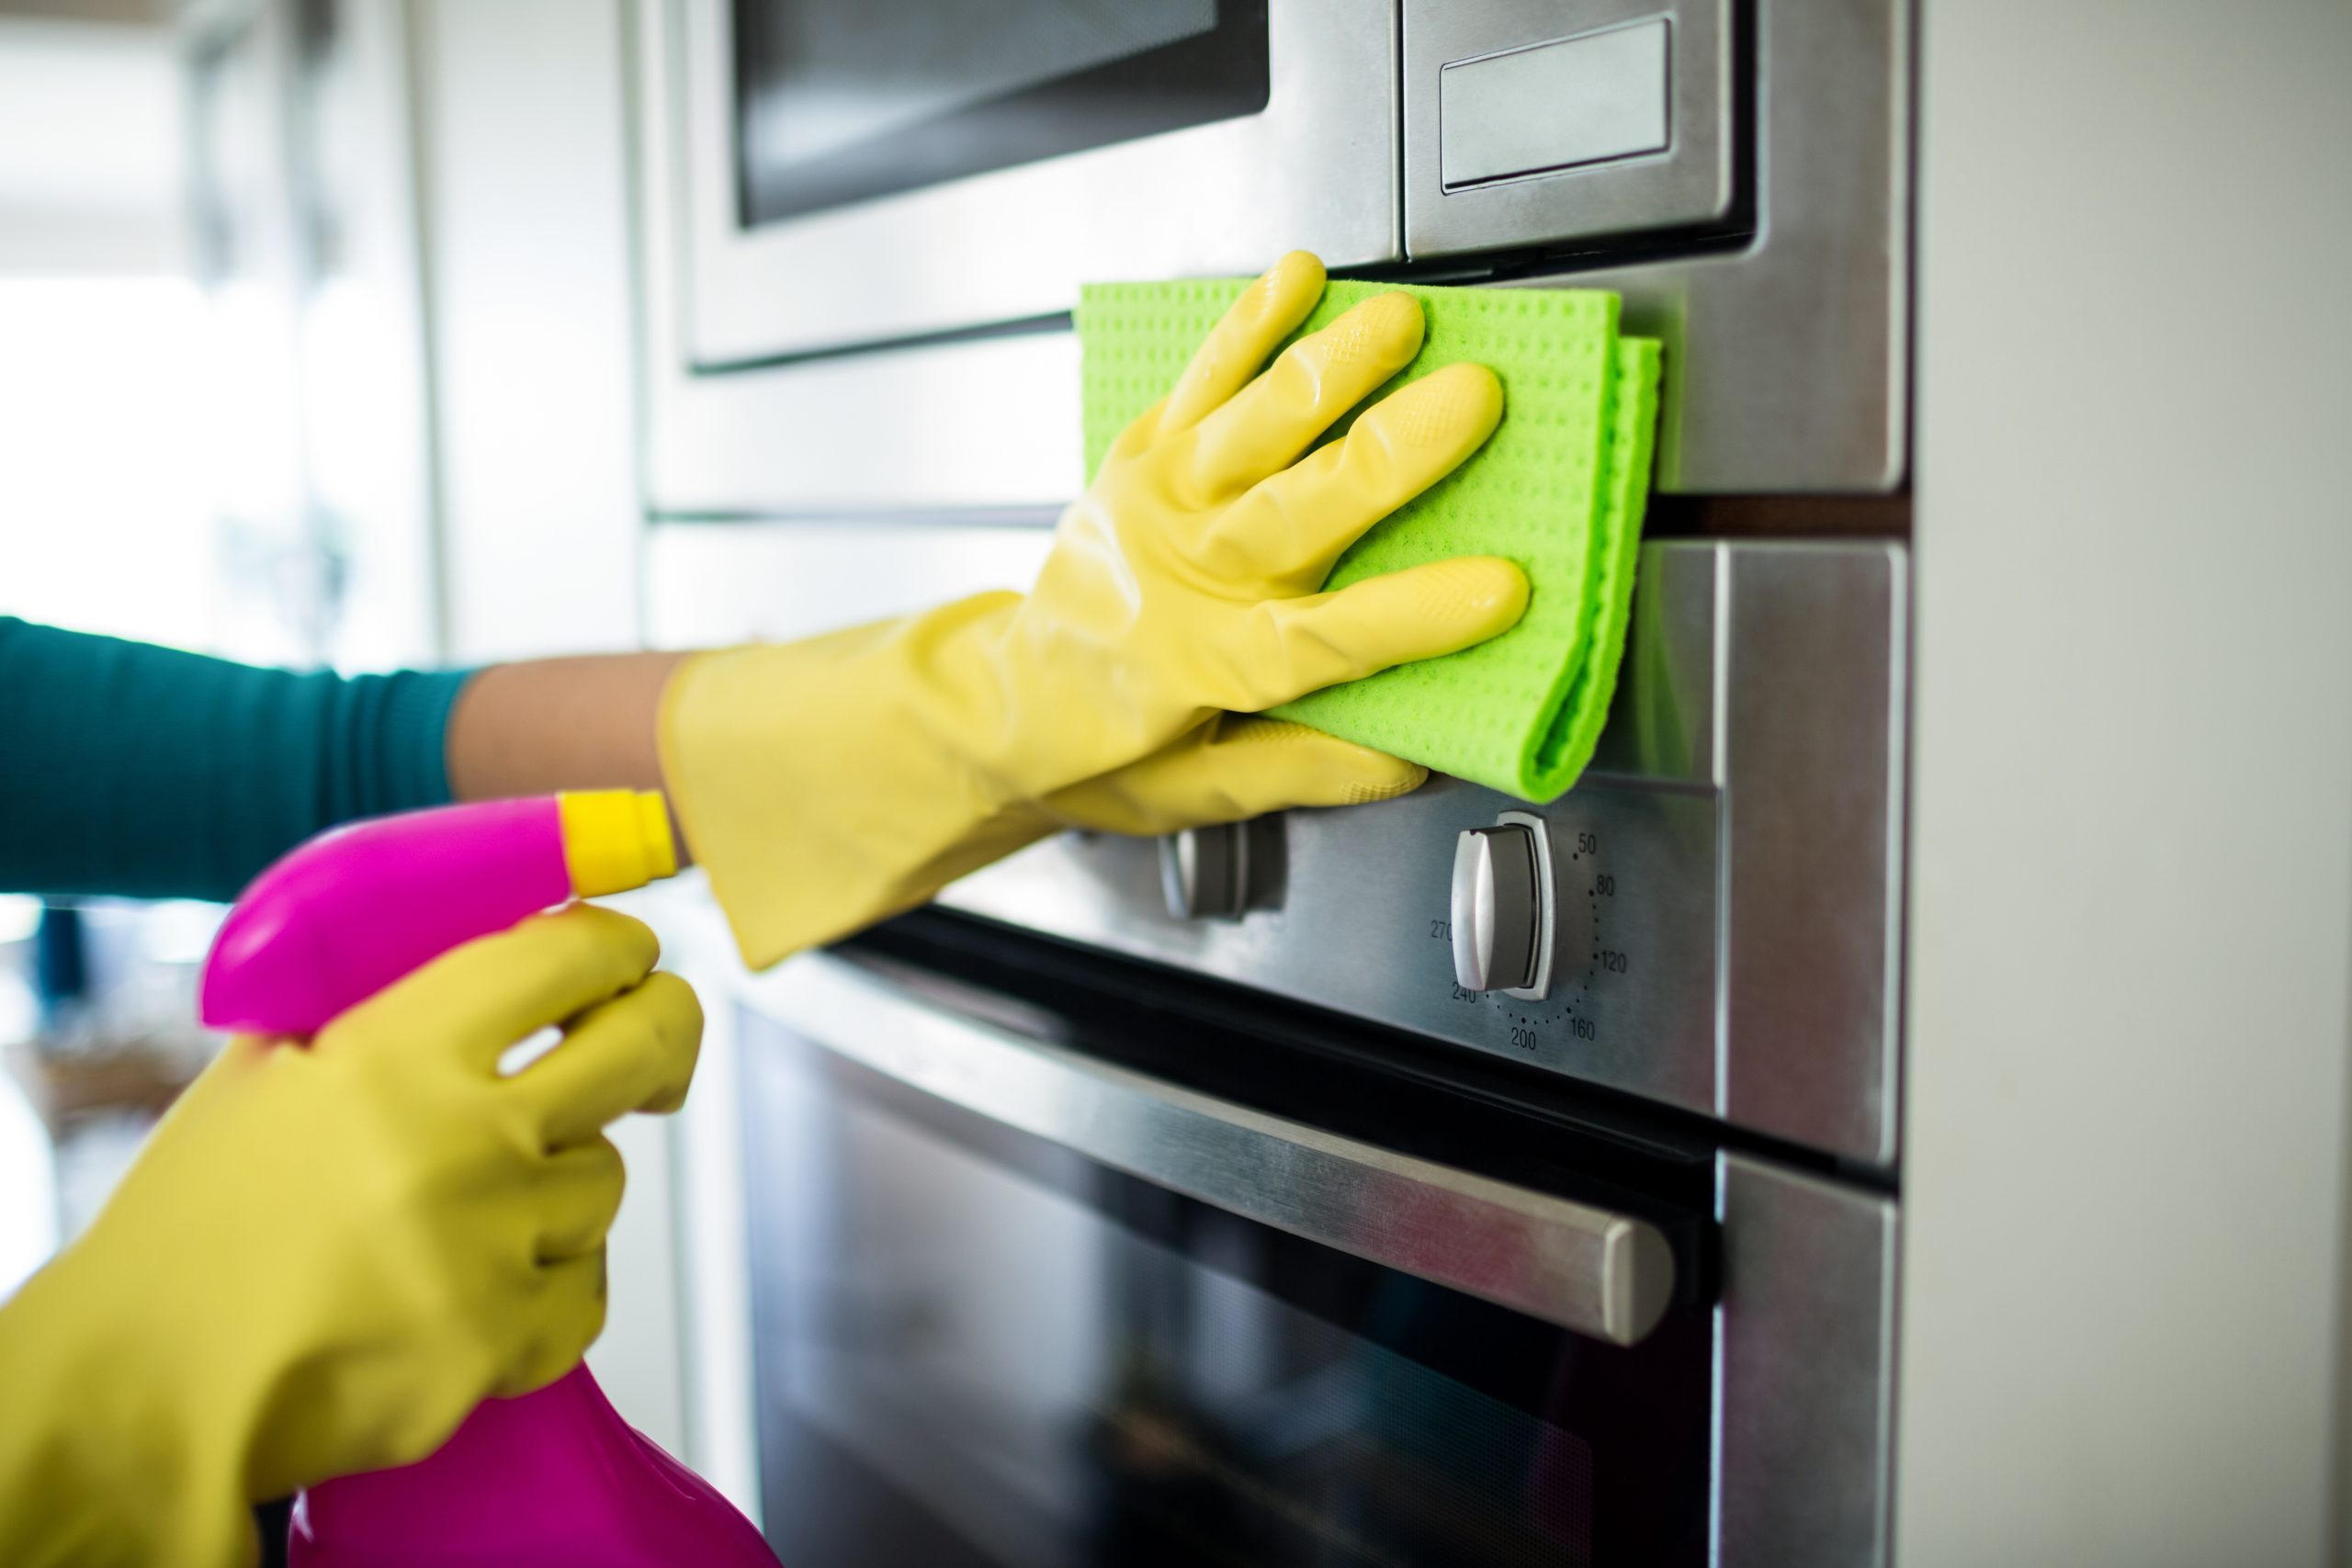 Do you provide same-day cleaning services?